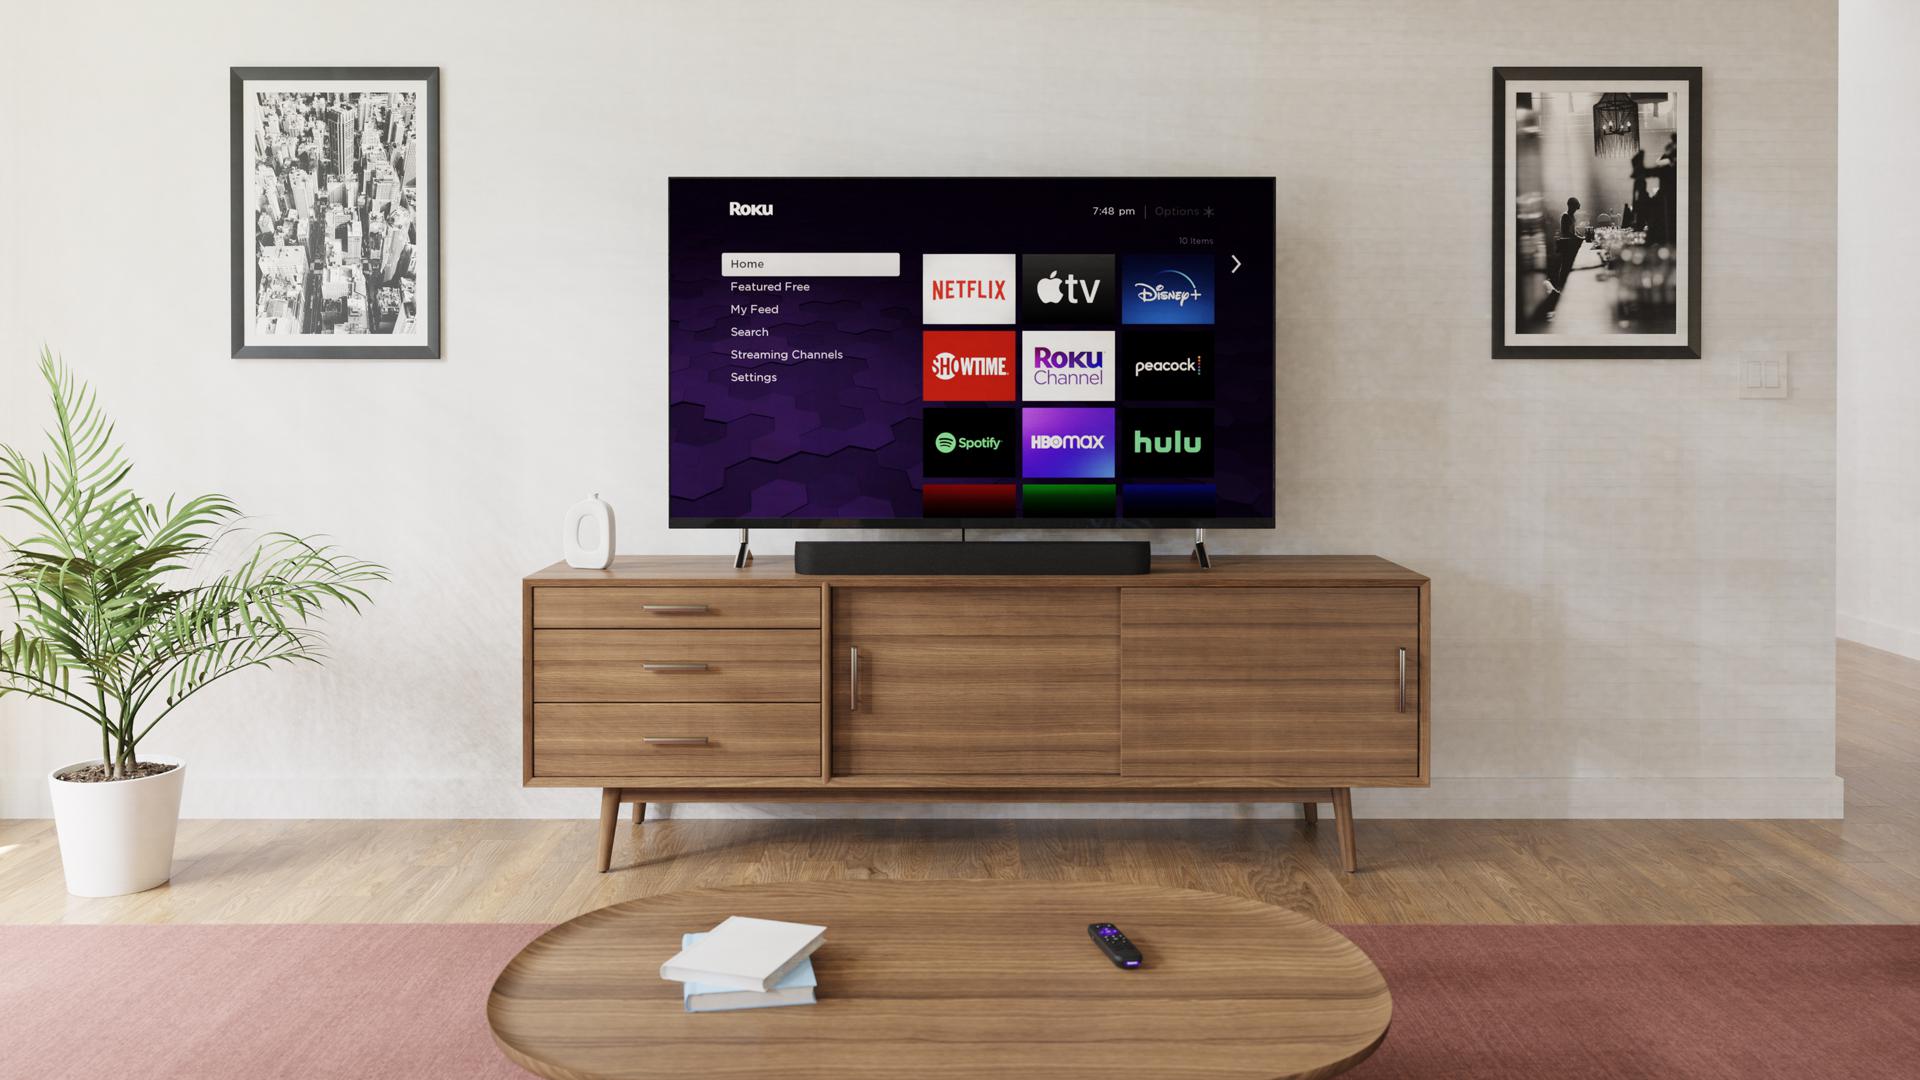 Roku CEO explains why the company is launching its own line of TVs